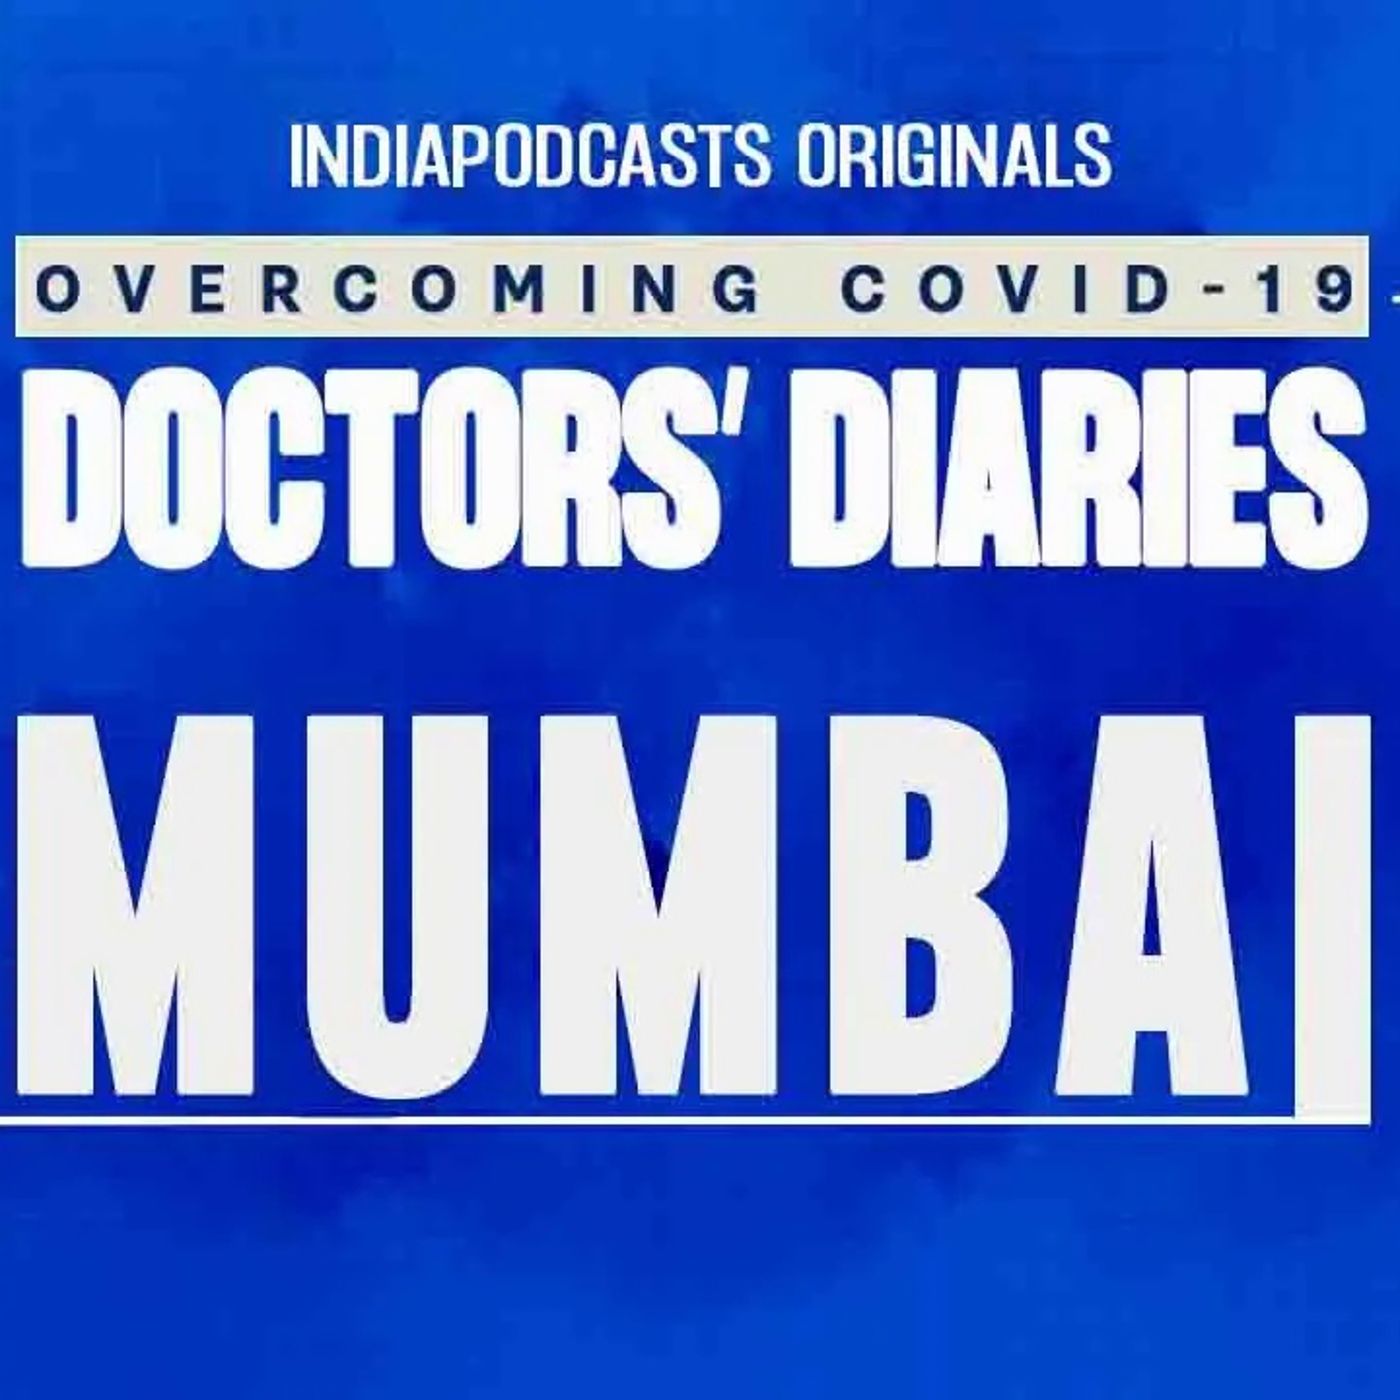 Mumbai Front-line Doctors' Stories Of COVID-19 | Doctors' Diaries | IndiaPodcasts Originals